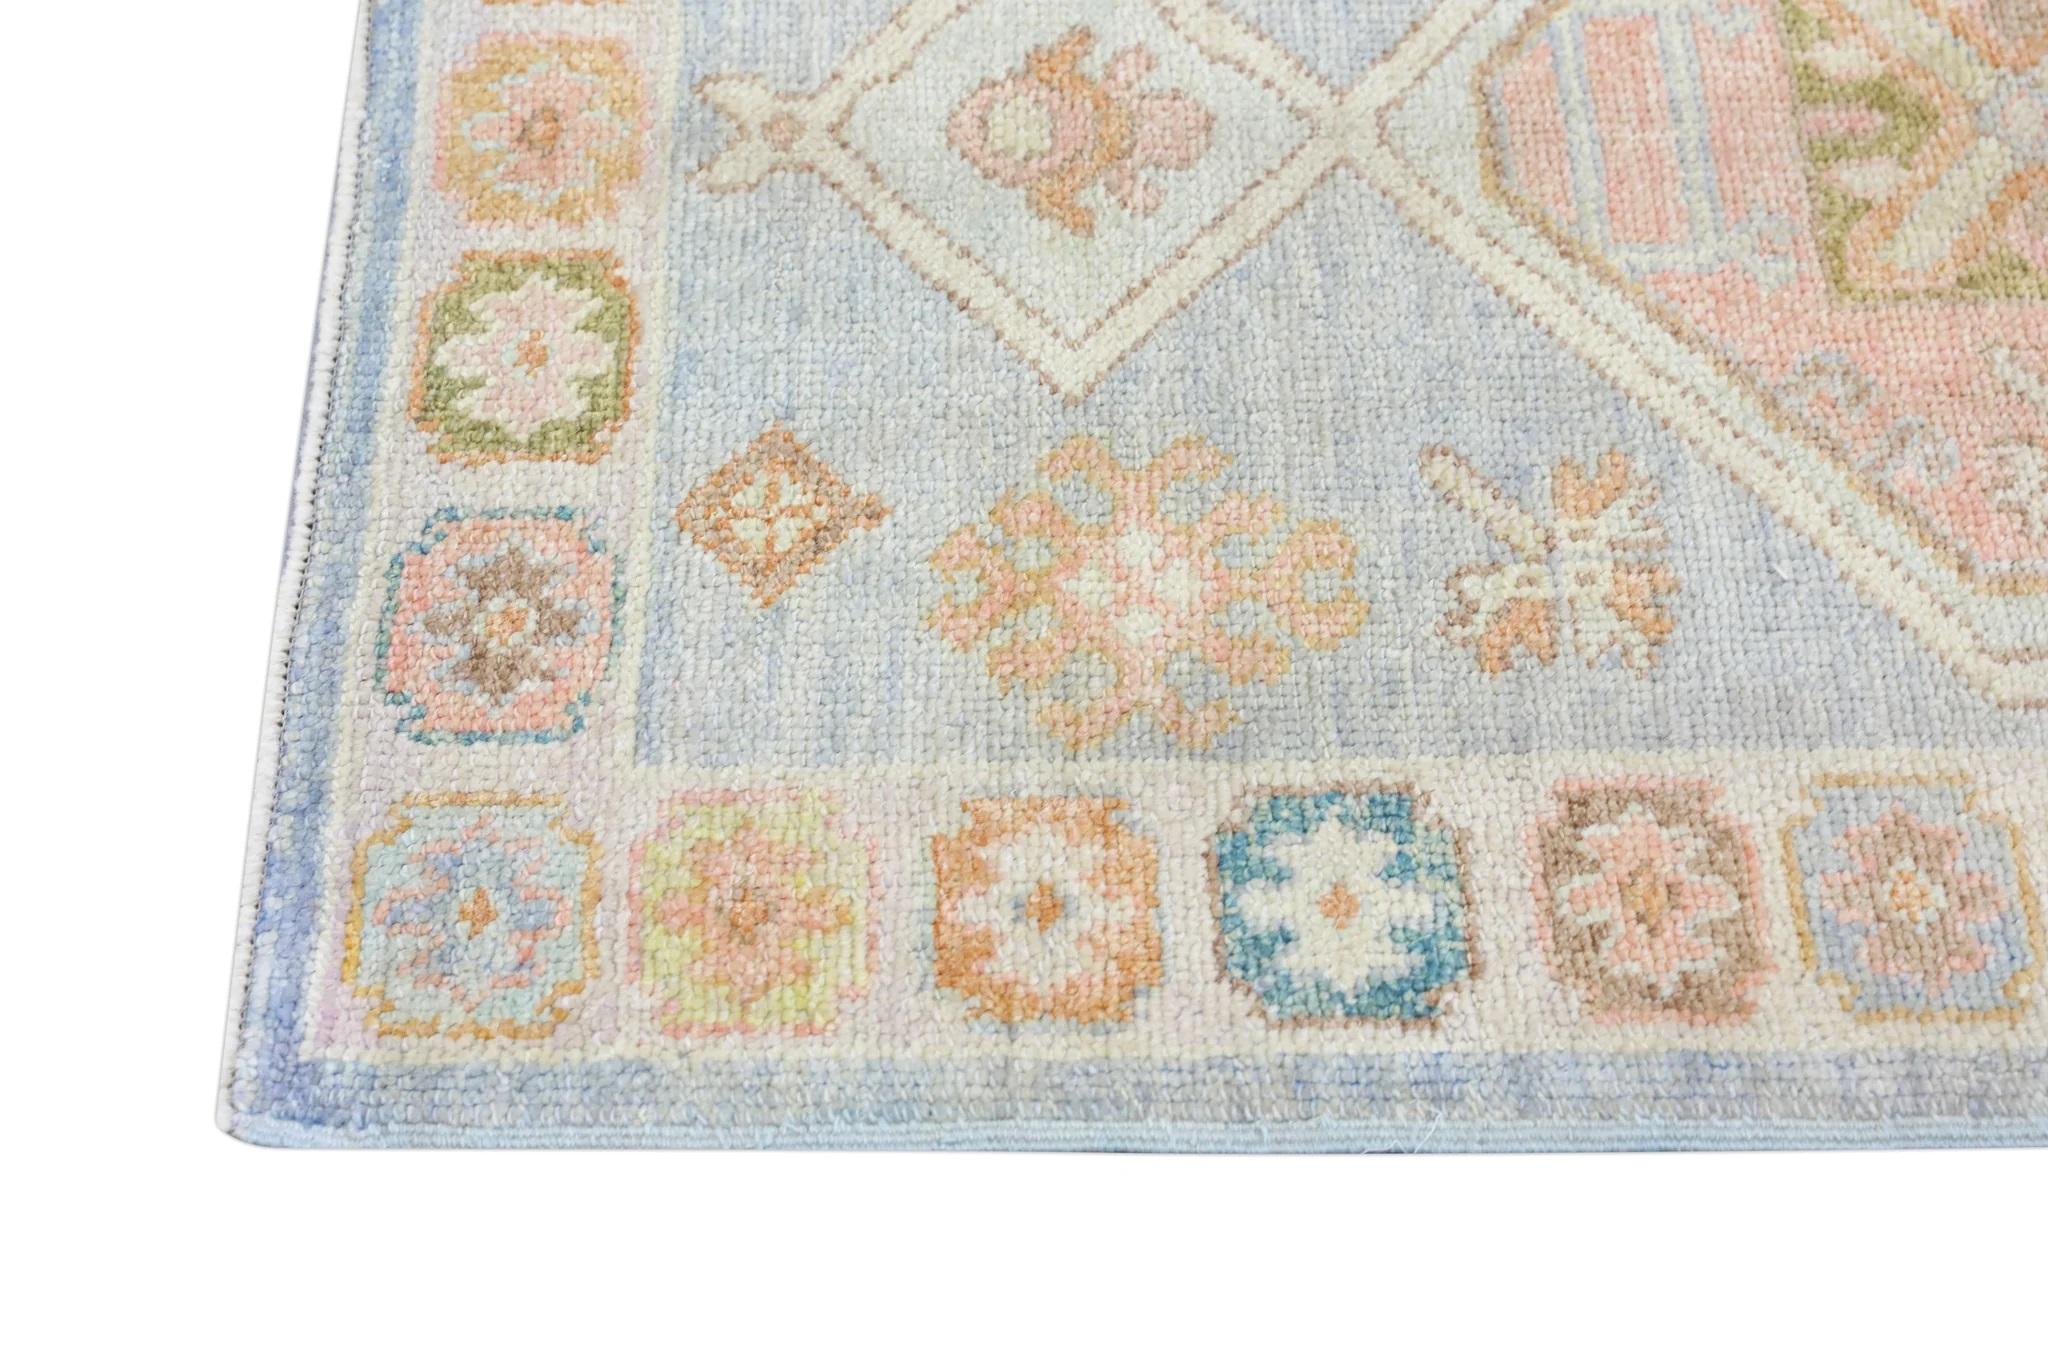 Contemporary Handwoven Wool Turkish Oushak Rug with Blue Medallion/Crest Design 3'3